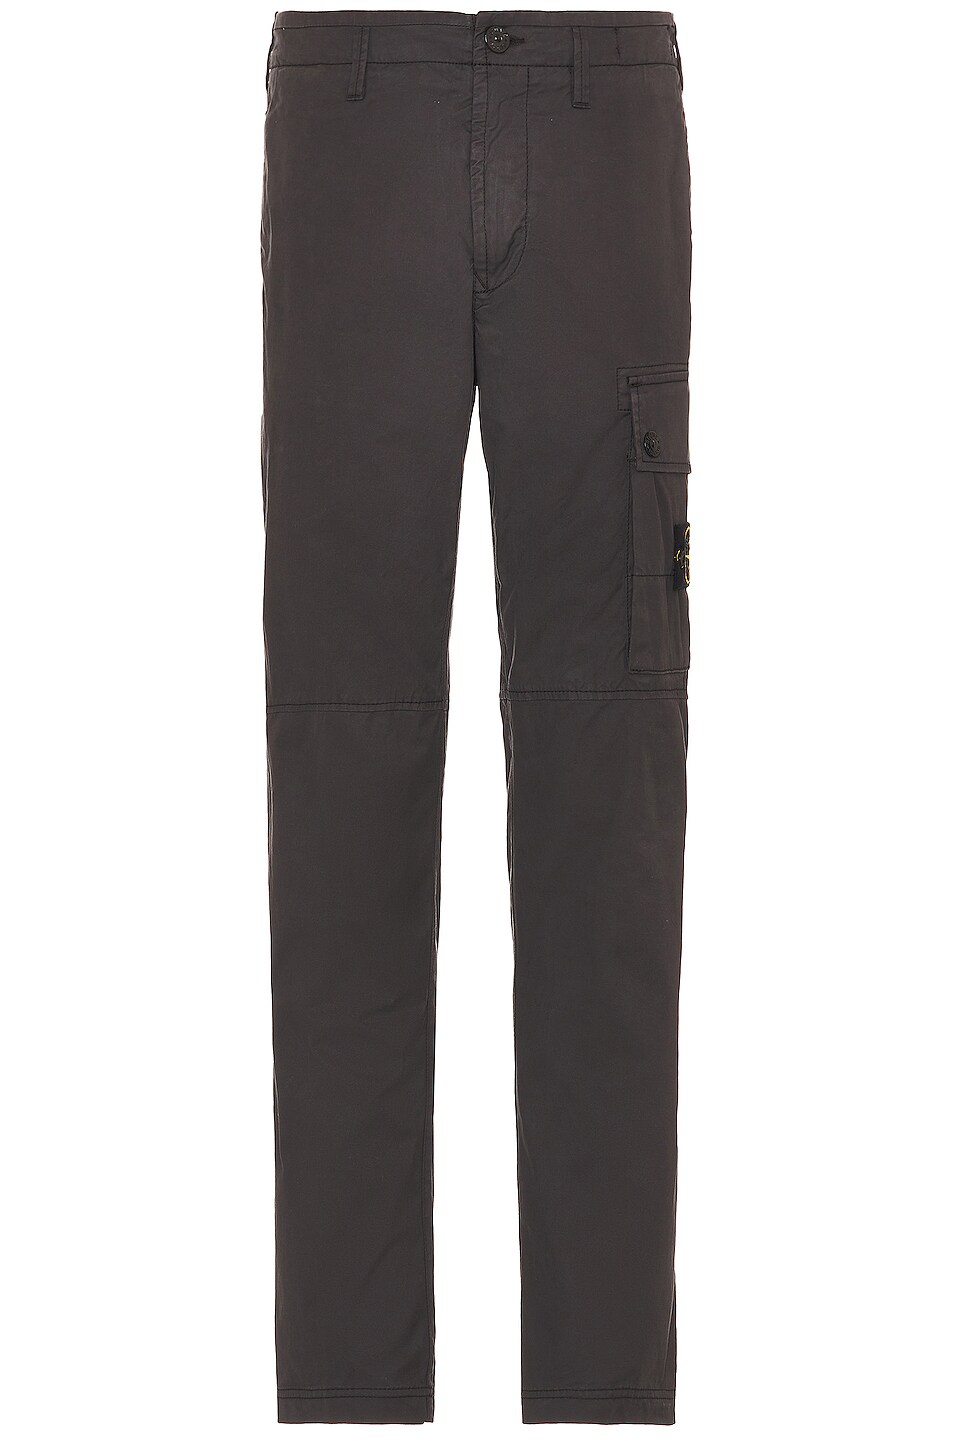 Image 1 of Stone Island Cargo Pant in Charcoal